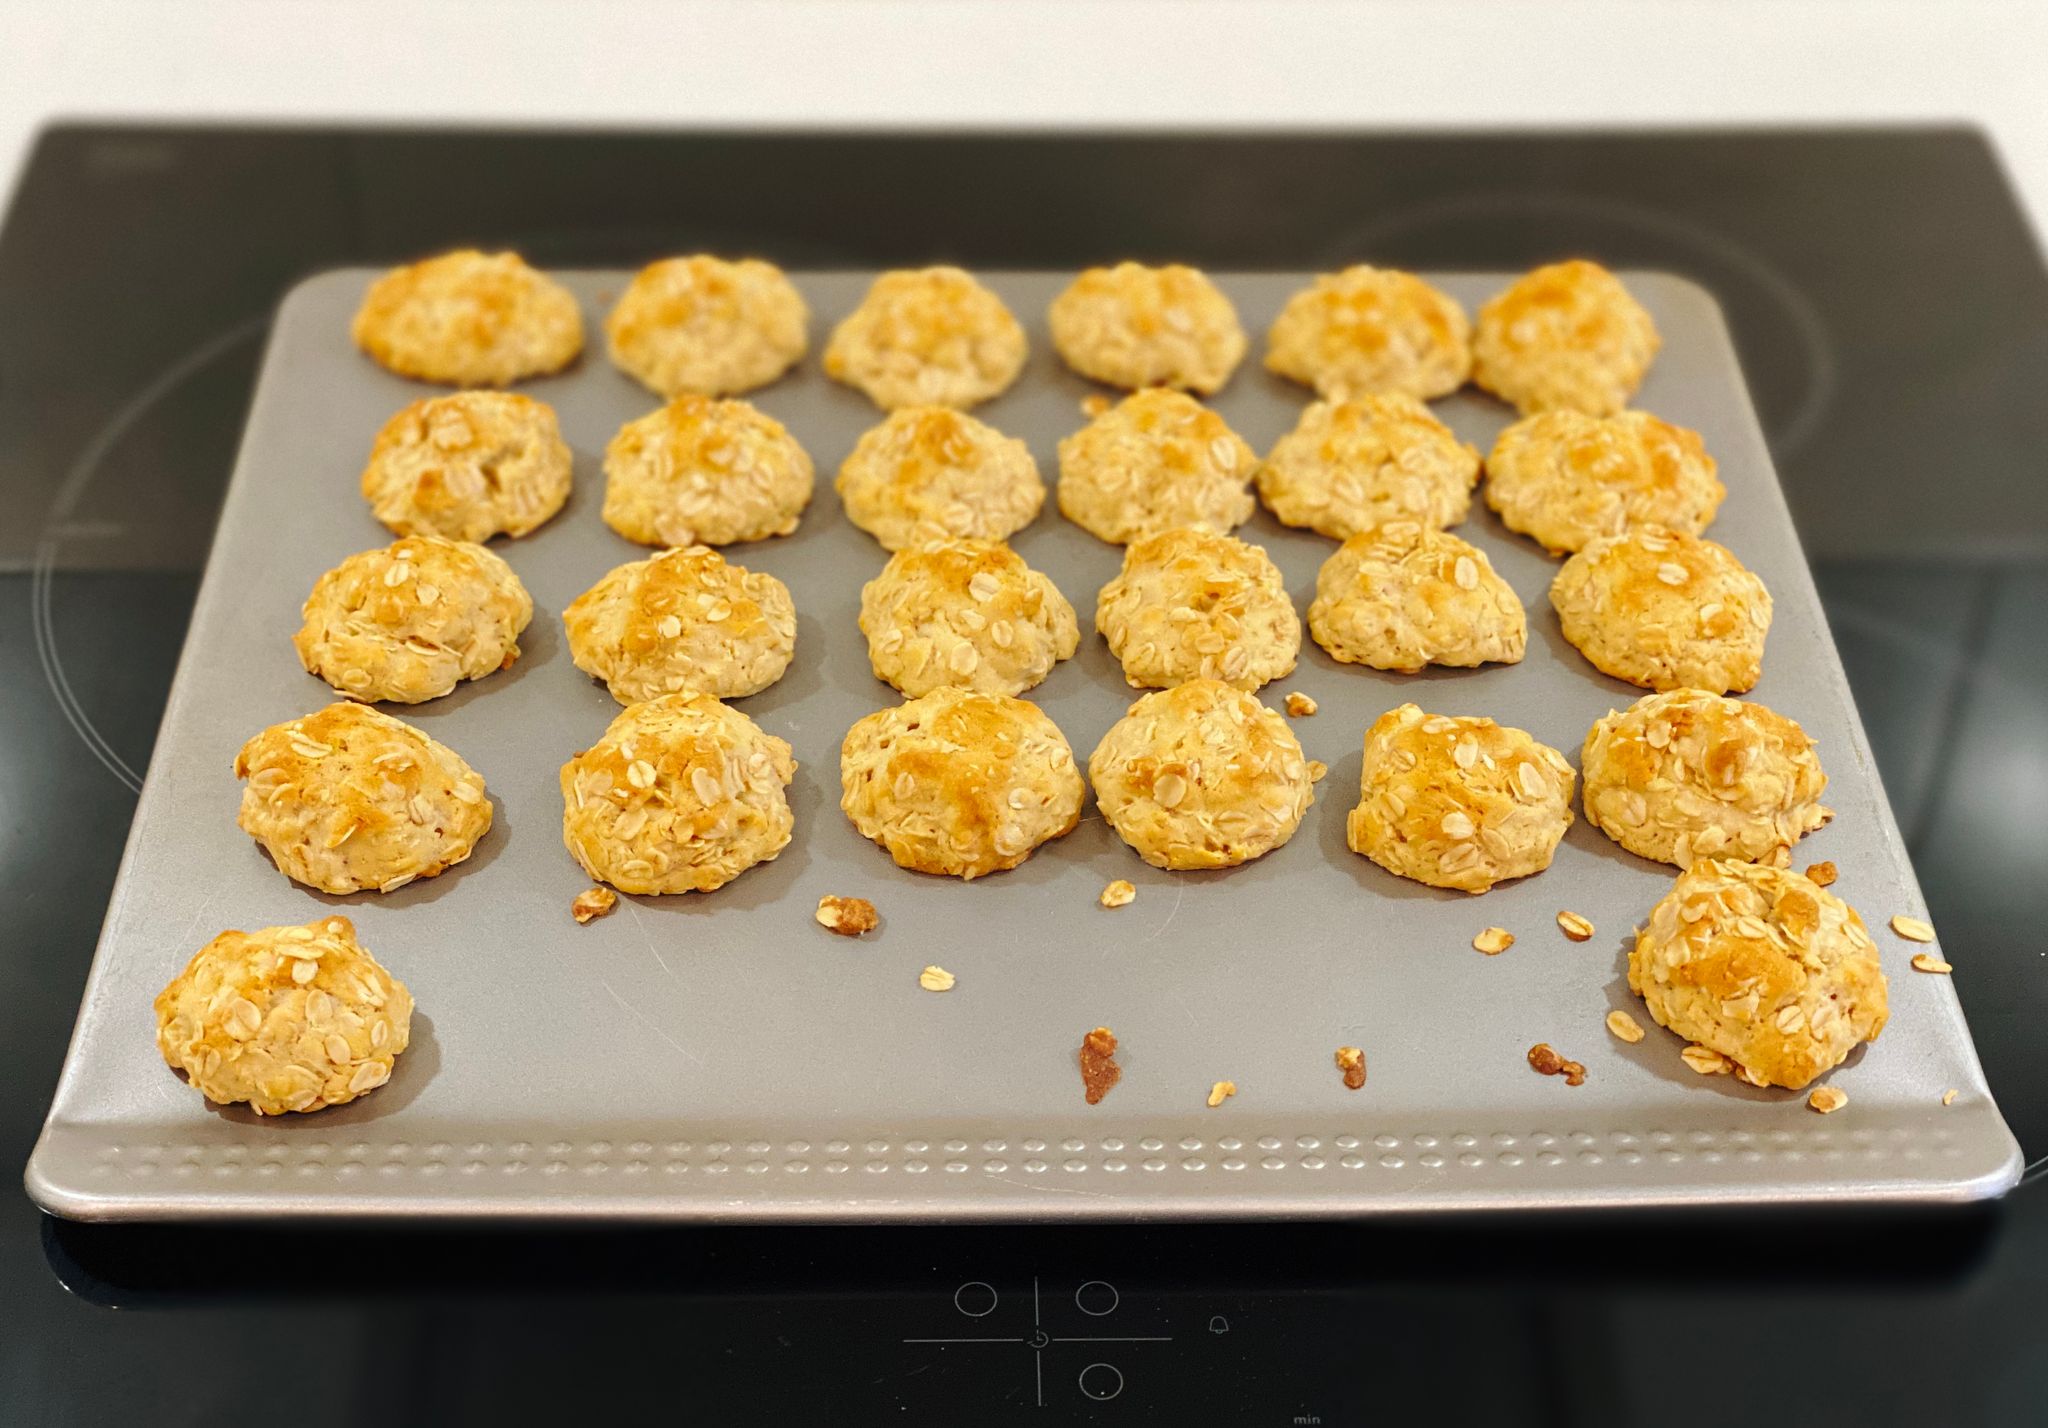 A photo of a batch of small round golden brown biscuits sittting on an oven tray.